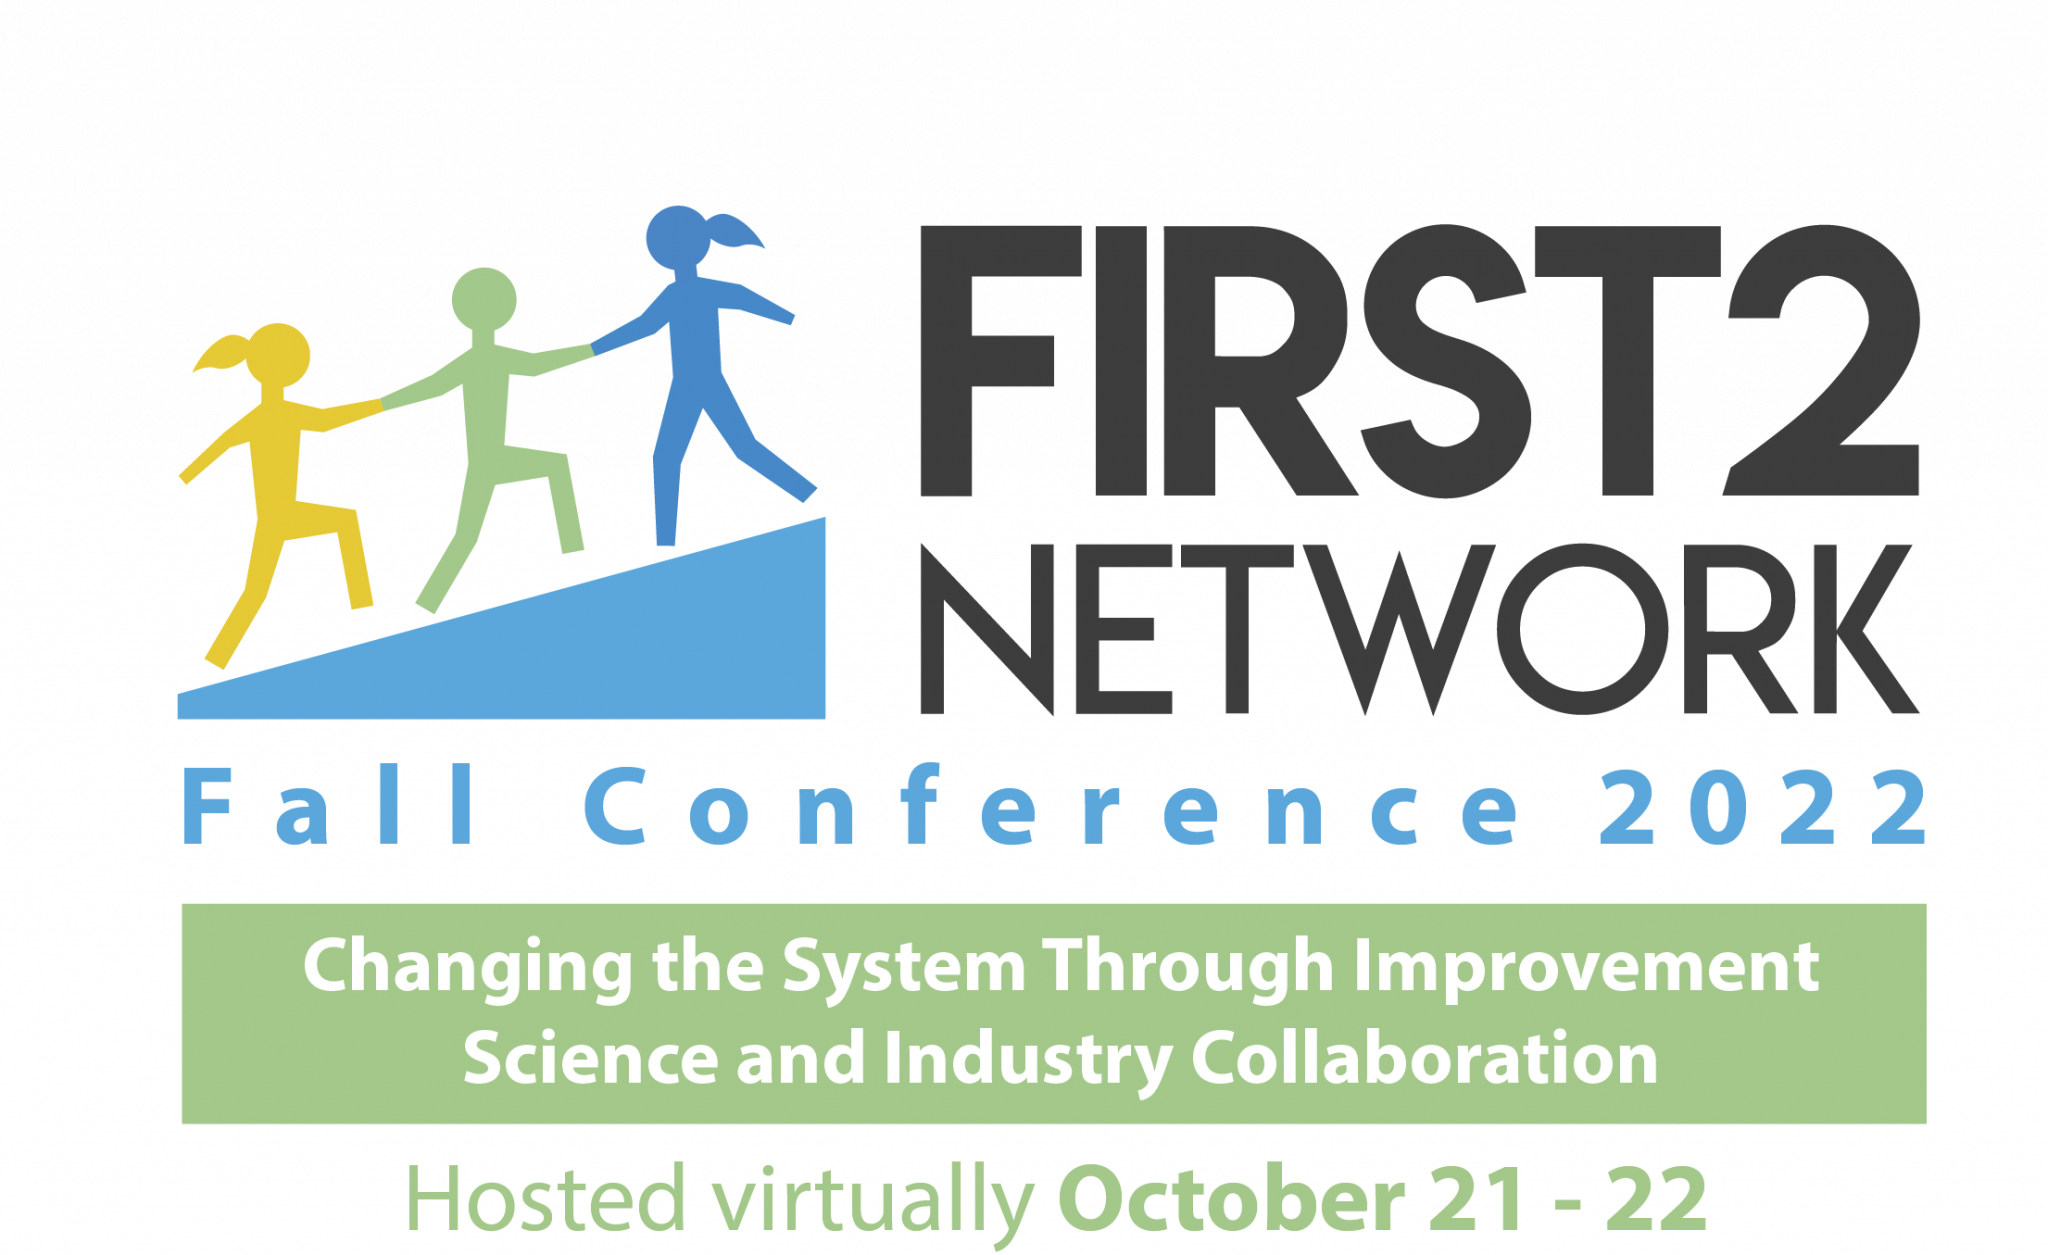 Fall Conference 2022 First2 Network